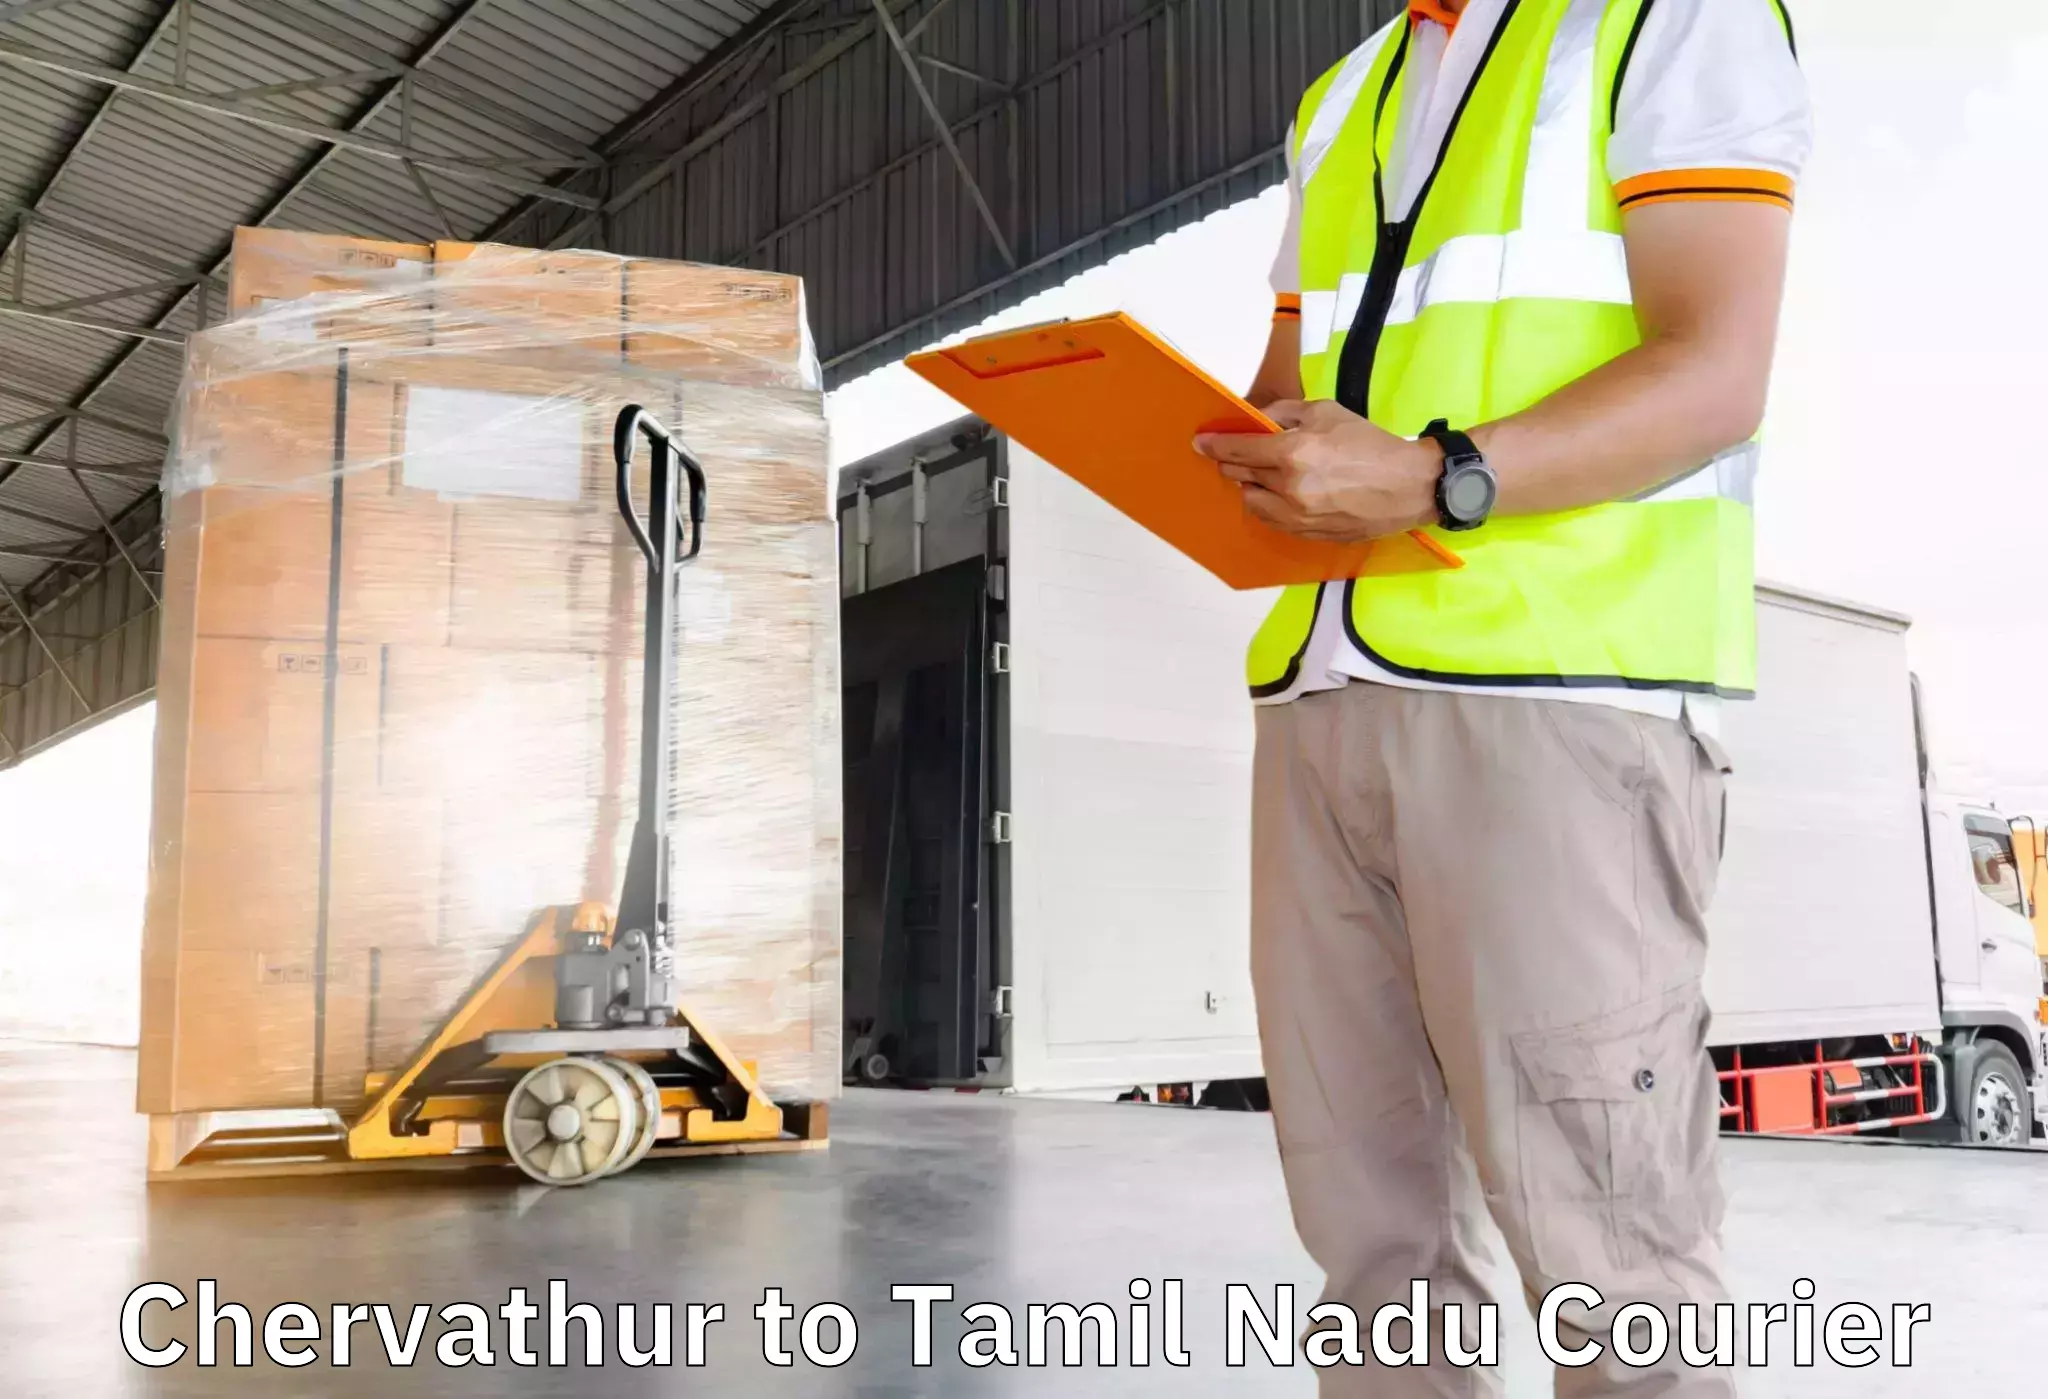 Professional goods transport Chervathur to Pollachi